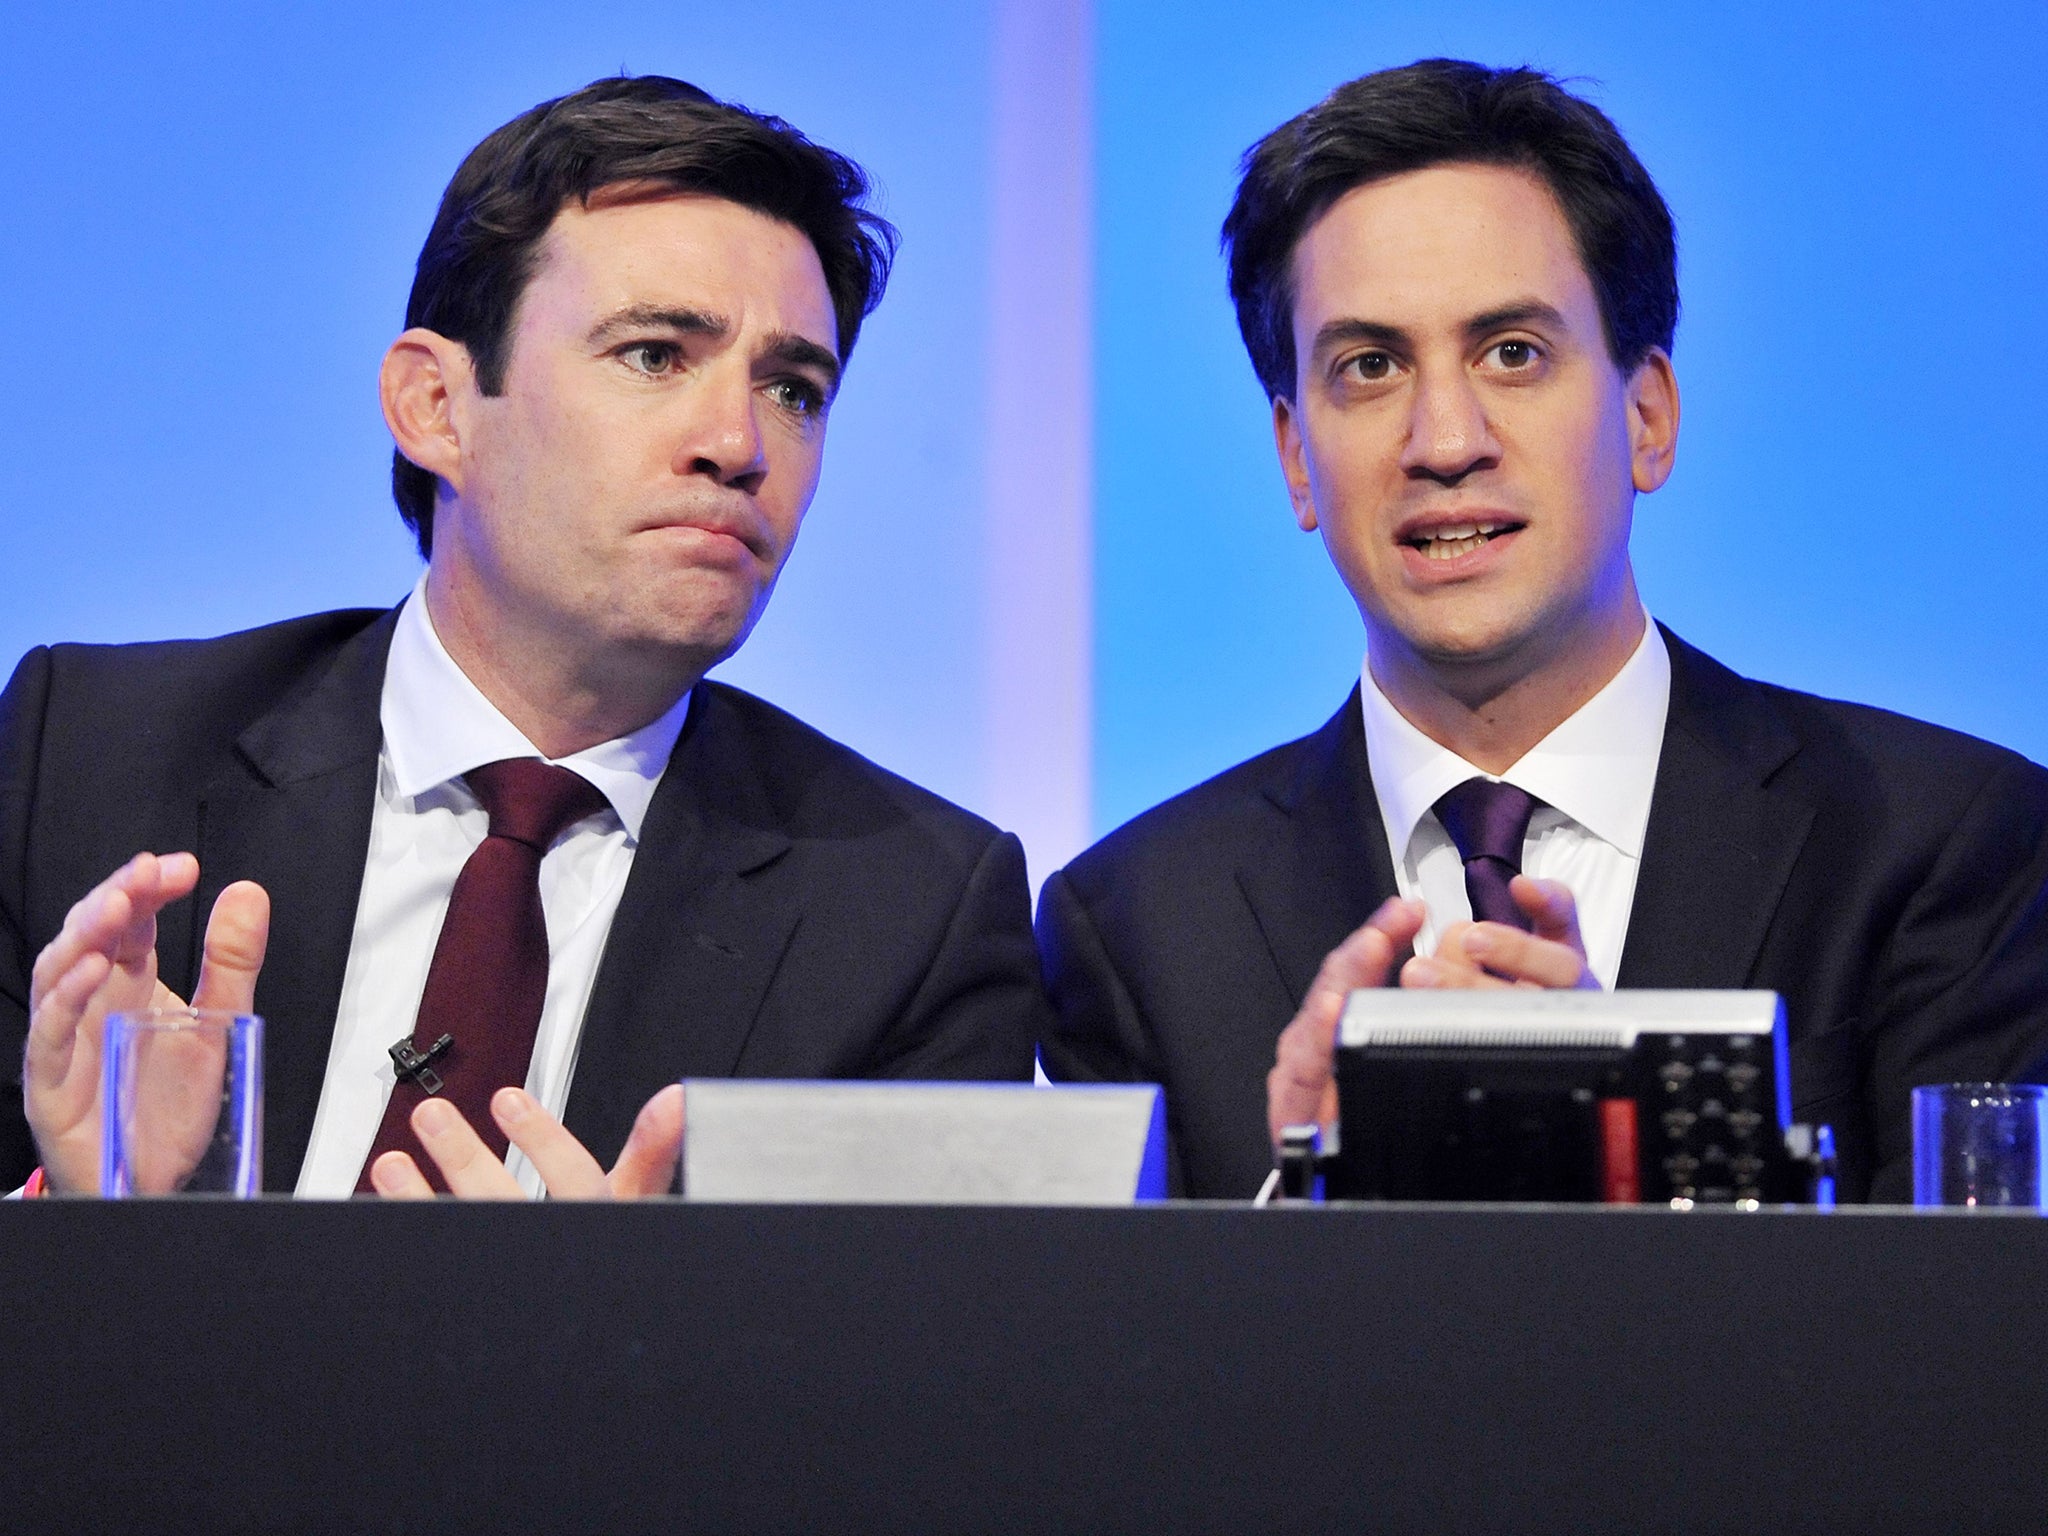 Andy Burnham, right, the shadow Health Secretary, warned that the coalition faces its “day of reckoning” at the polls in May (Rex)